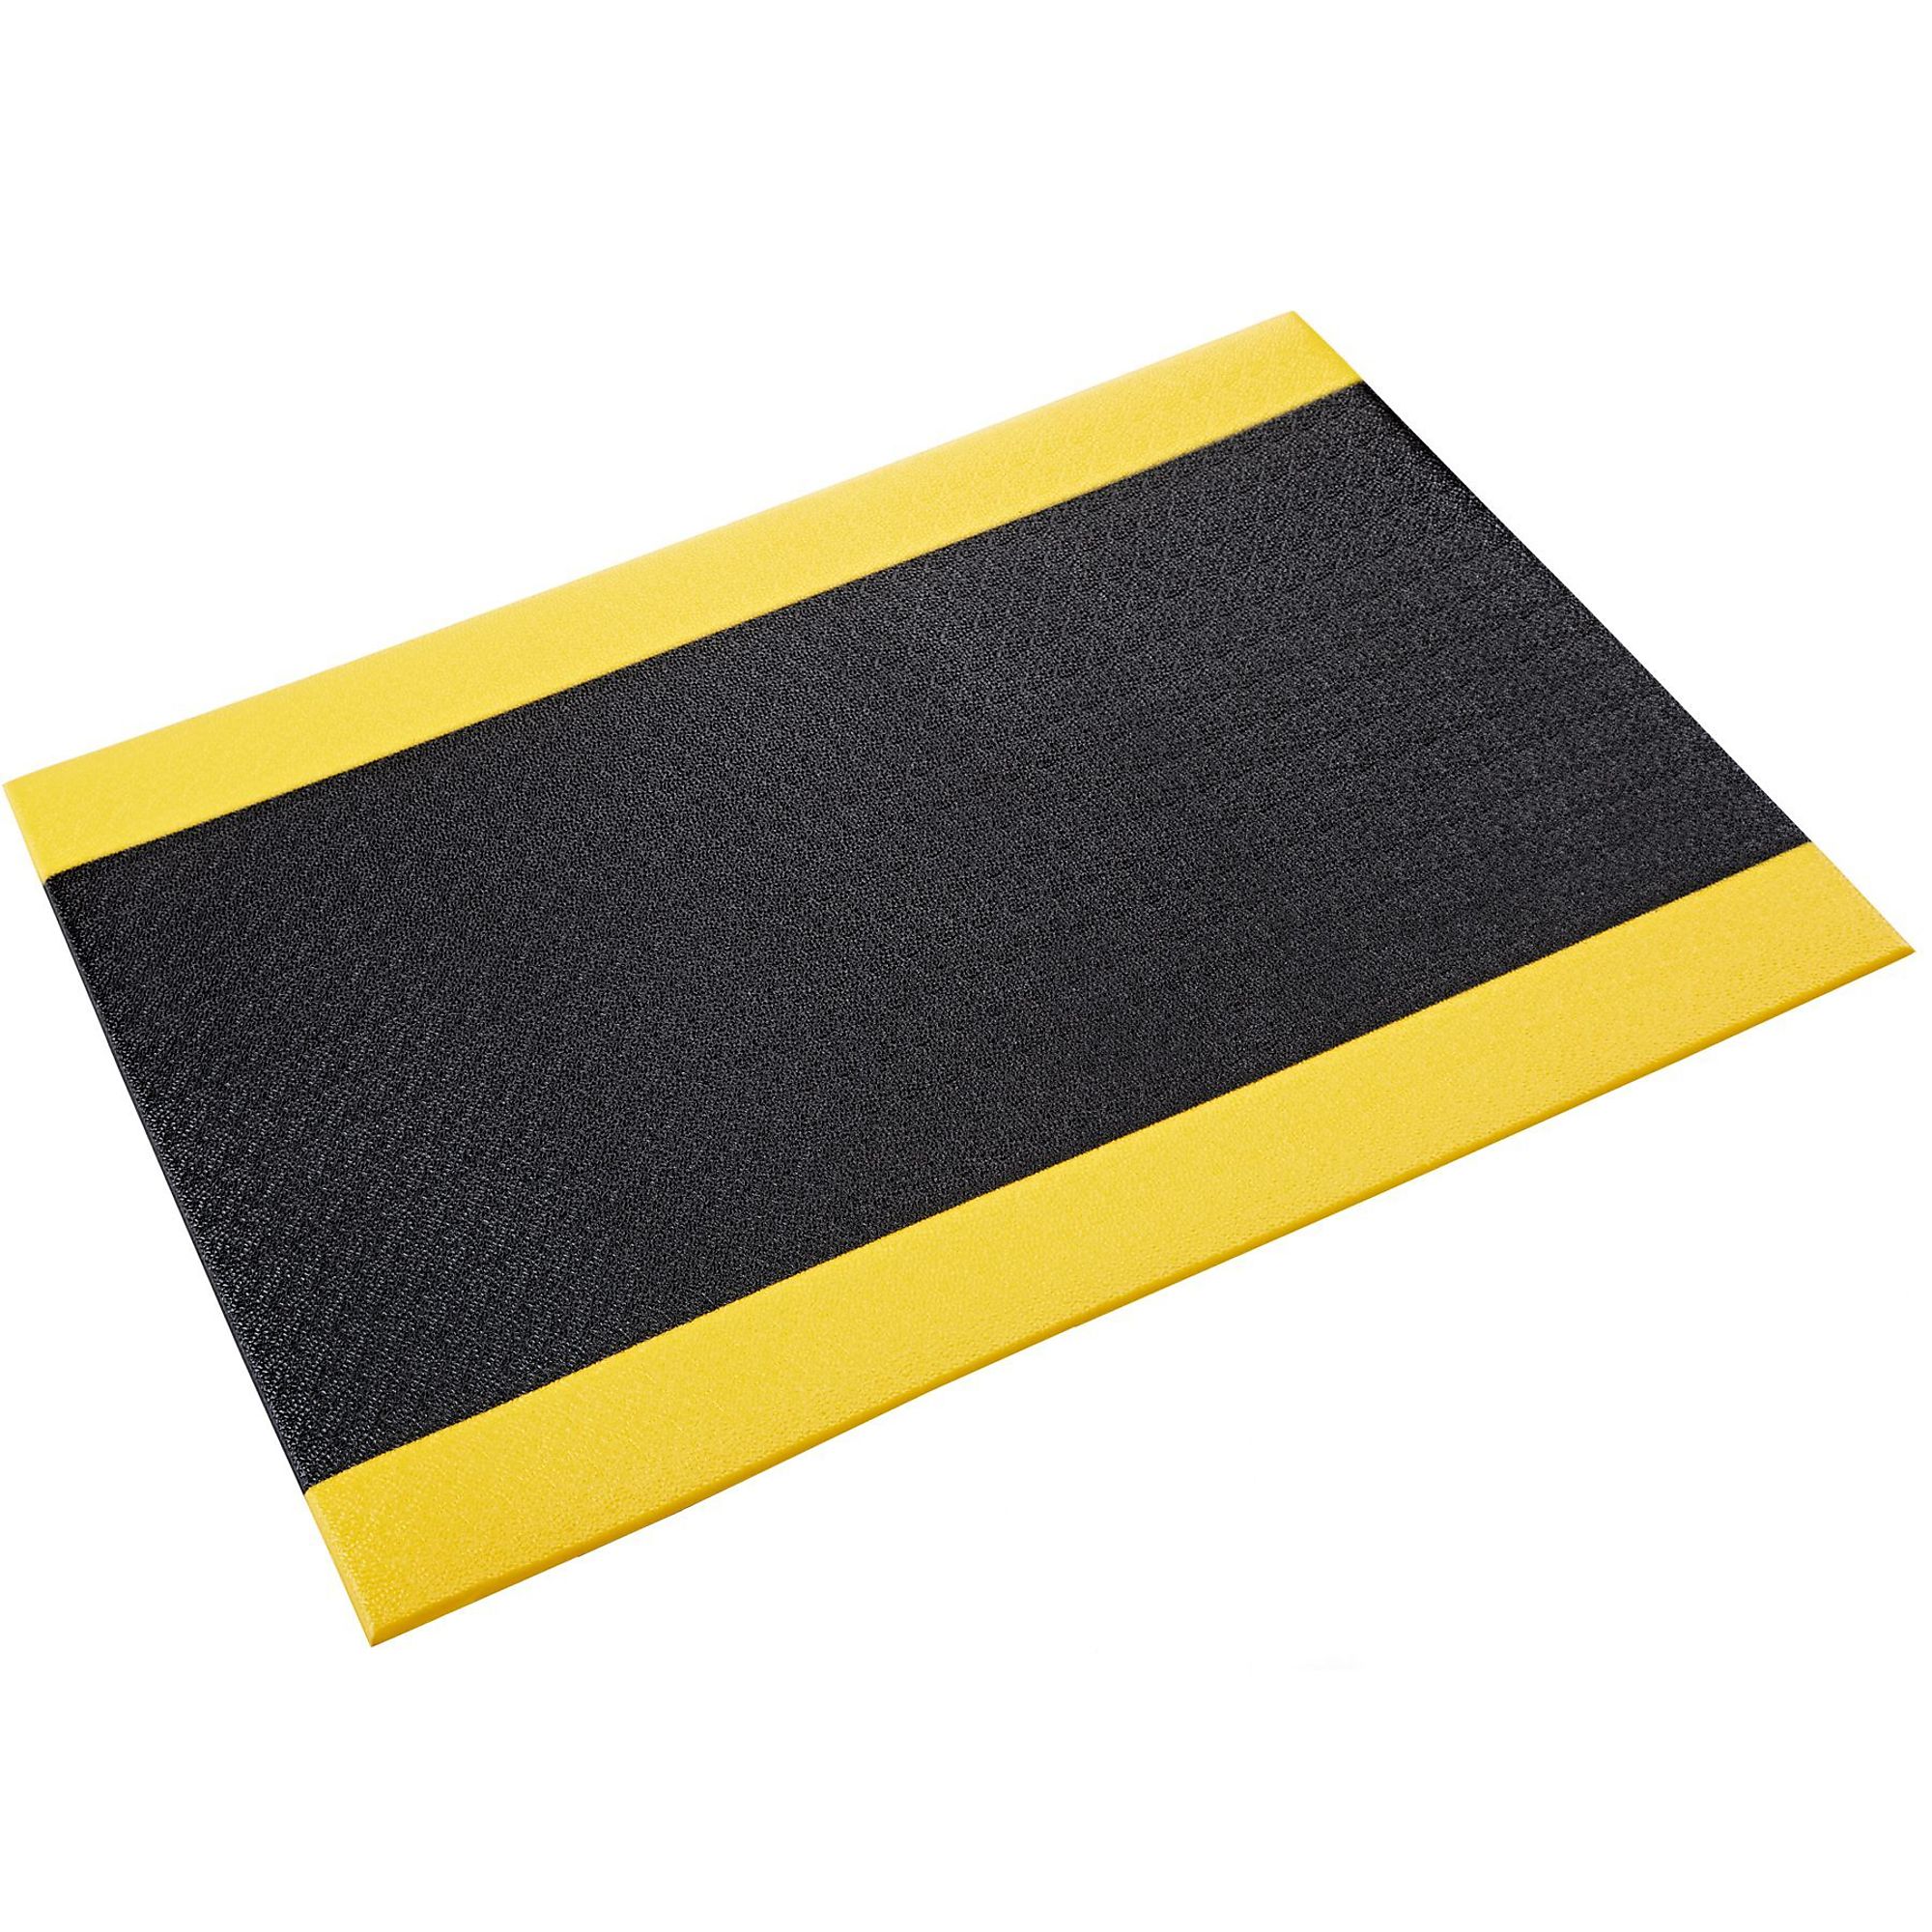 Crown Matting Technologies, Comfort-King 1/2 2ft.x3ft. Black w/Yellow, Width 24 in, Length 36 in, Thickness 1/2 in, Model K4 0023YB